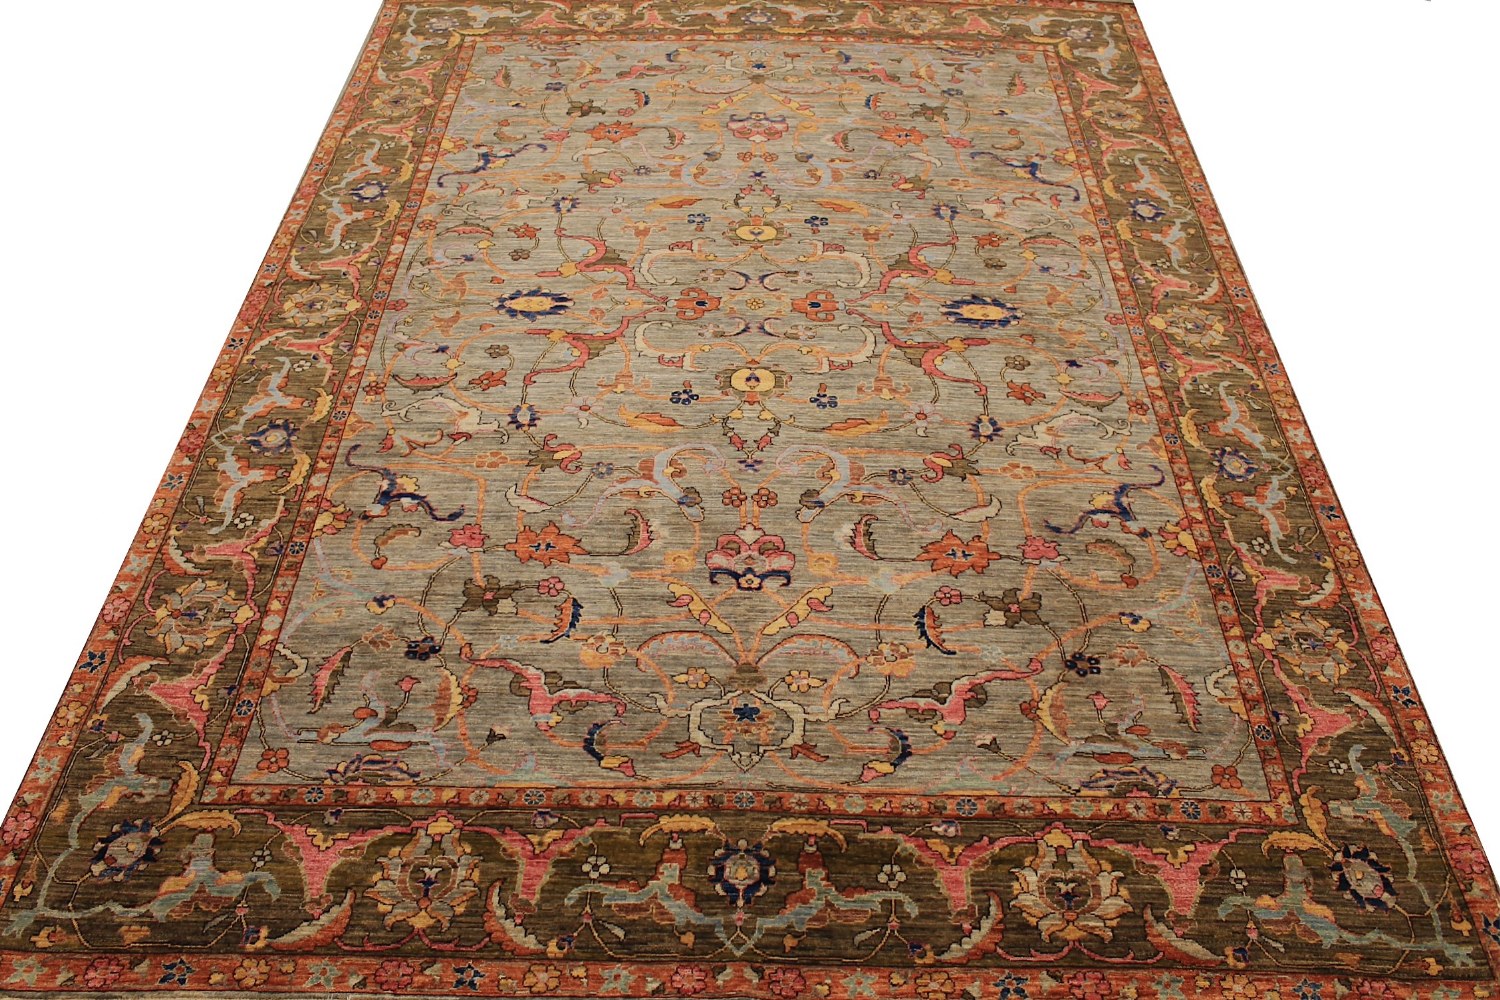 9x12 Aryana & Antique Revivals Hand Knotted Wool Area Rug - MR028846